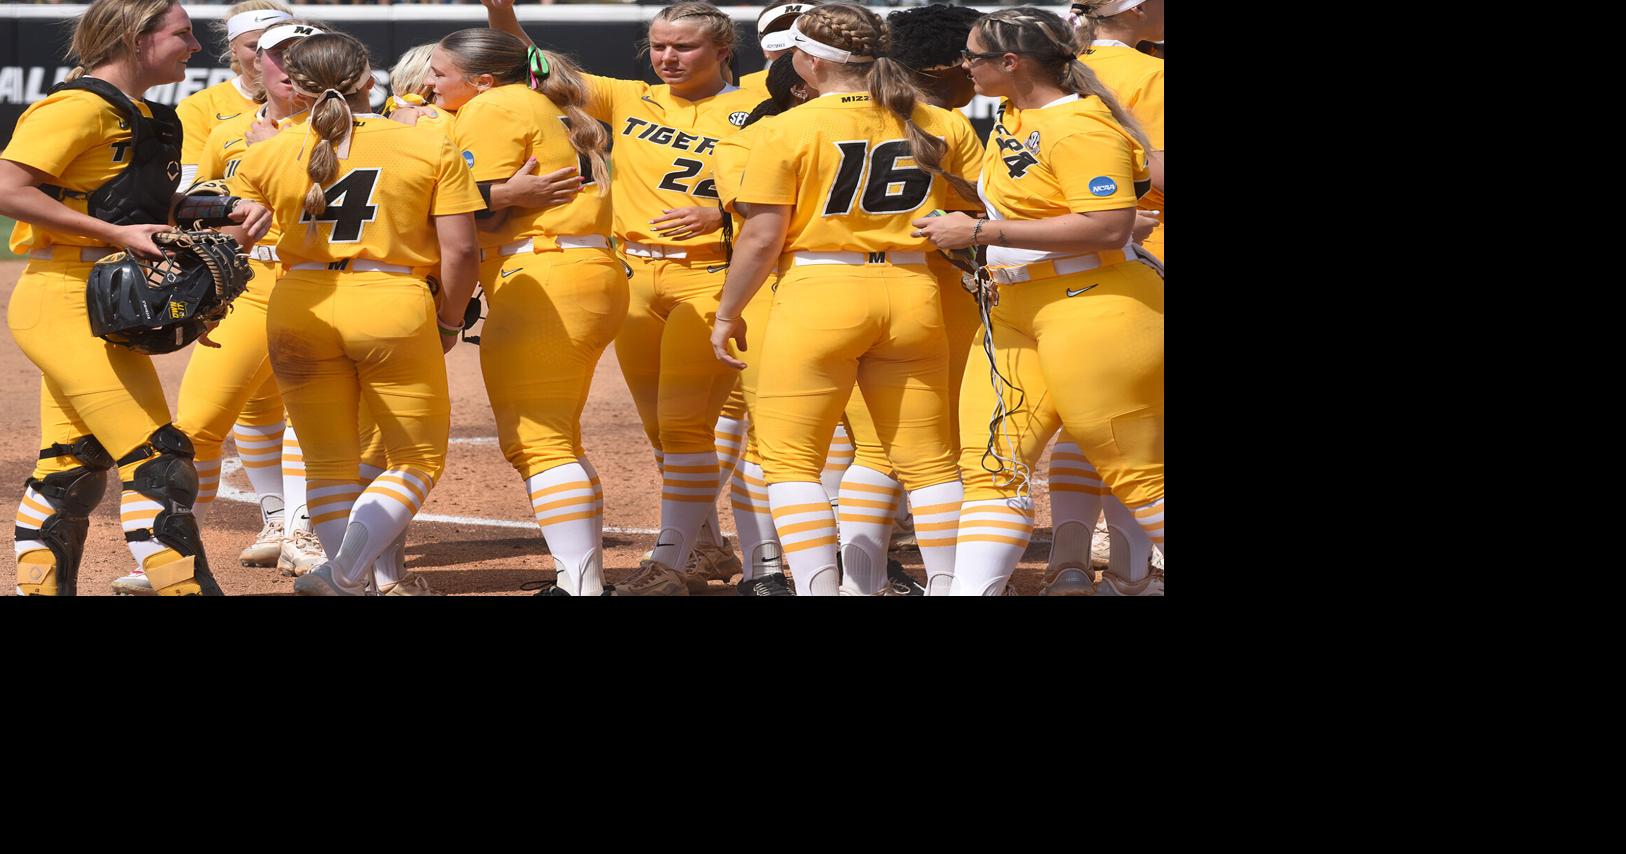 Ace Pitcher Krings Leads Missouri Softball Team to Regional Final Victory: The Tigers’ Unstoppable Run Continues